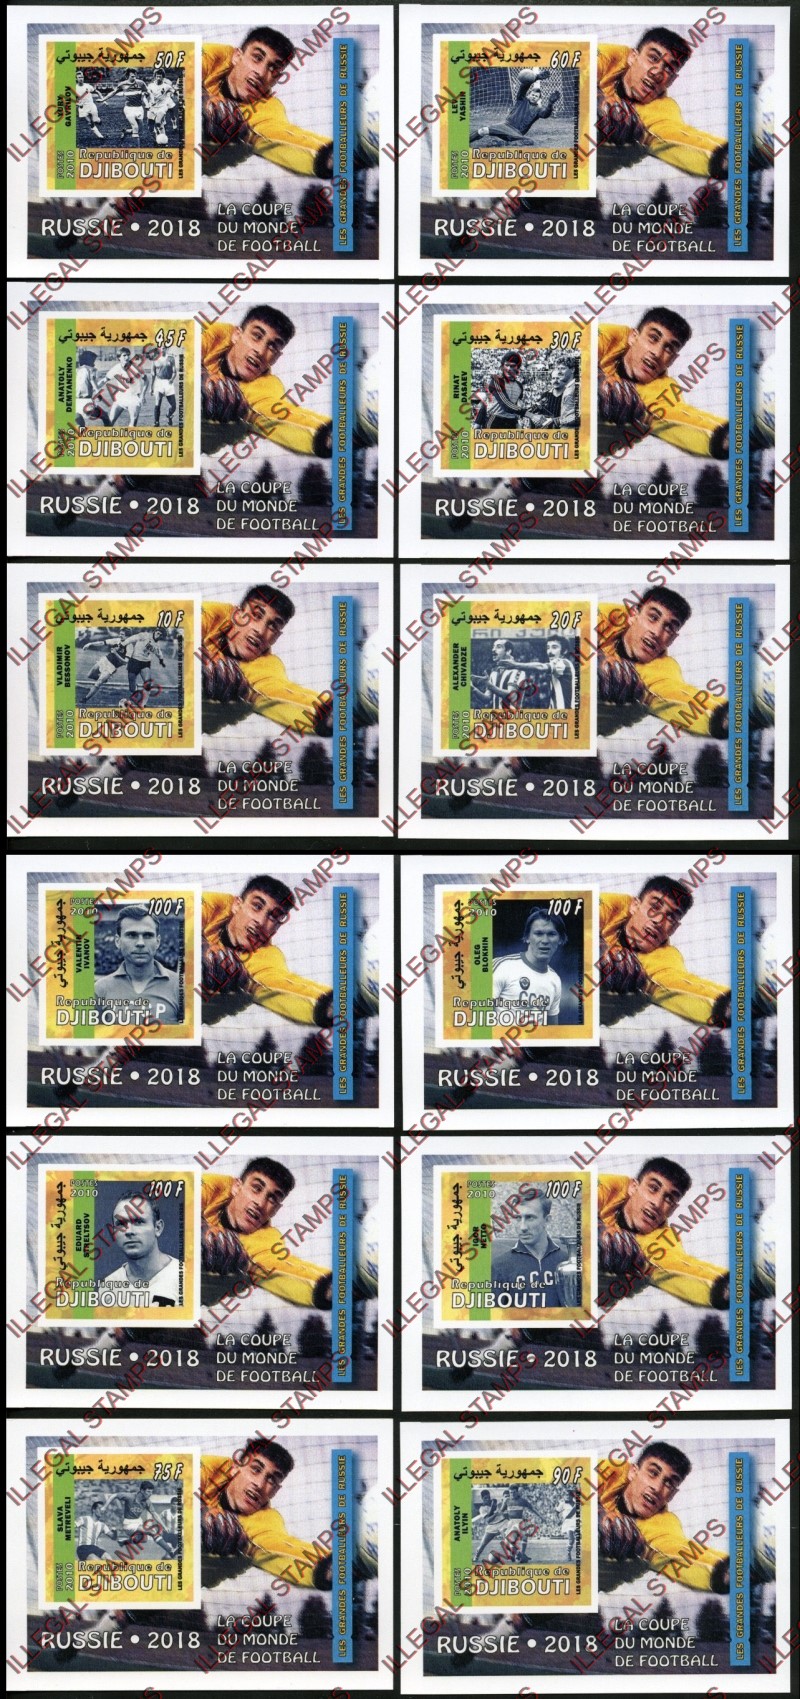 Djibouti 2010 World Cup Soccer Football (Russia 2018) Illegal Stamp Souvenir Sheets of 1